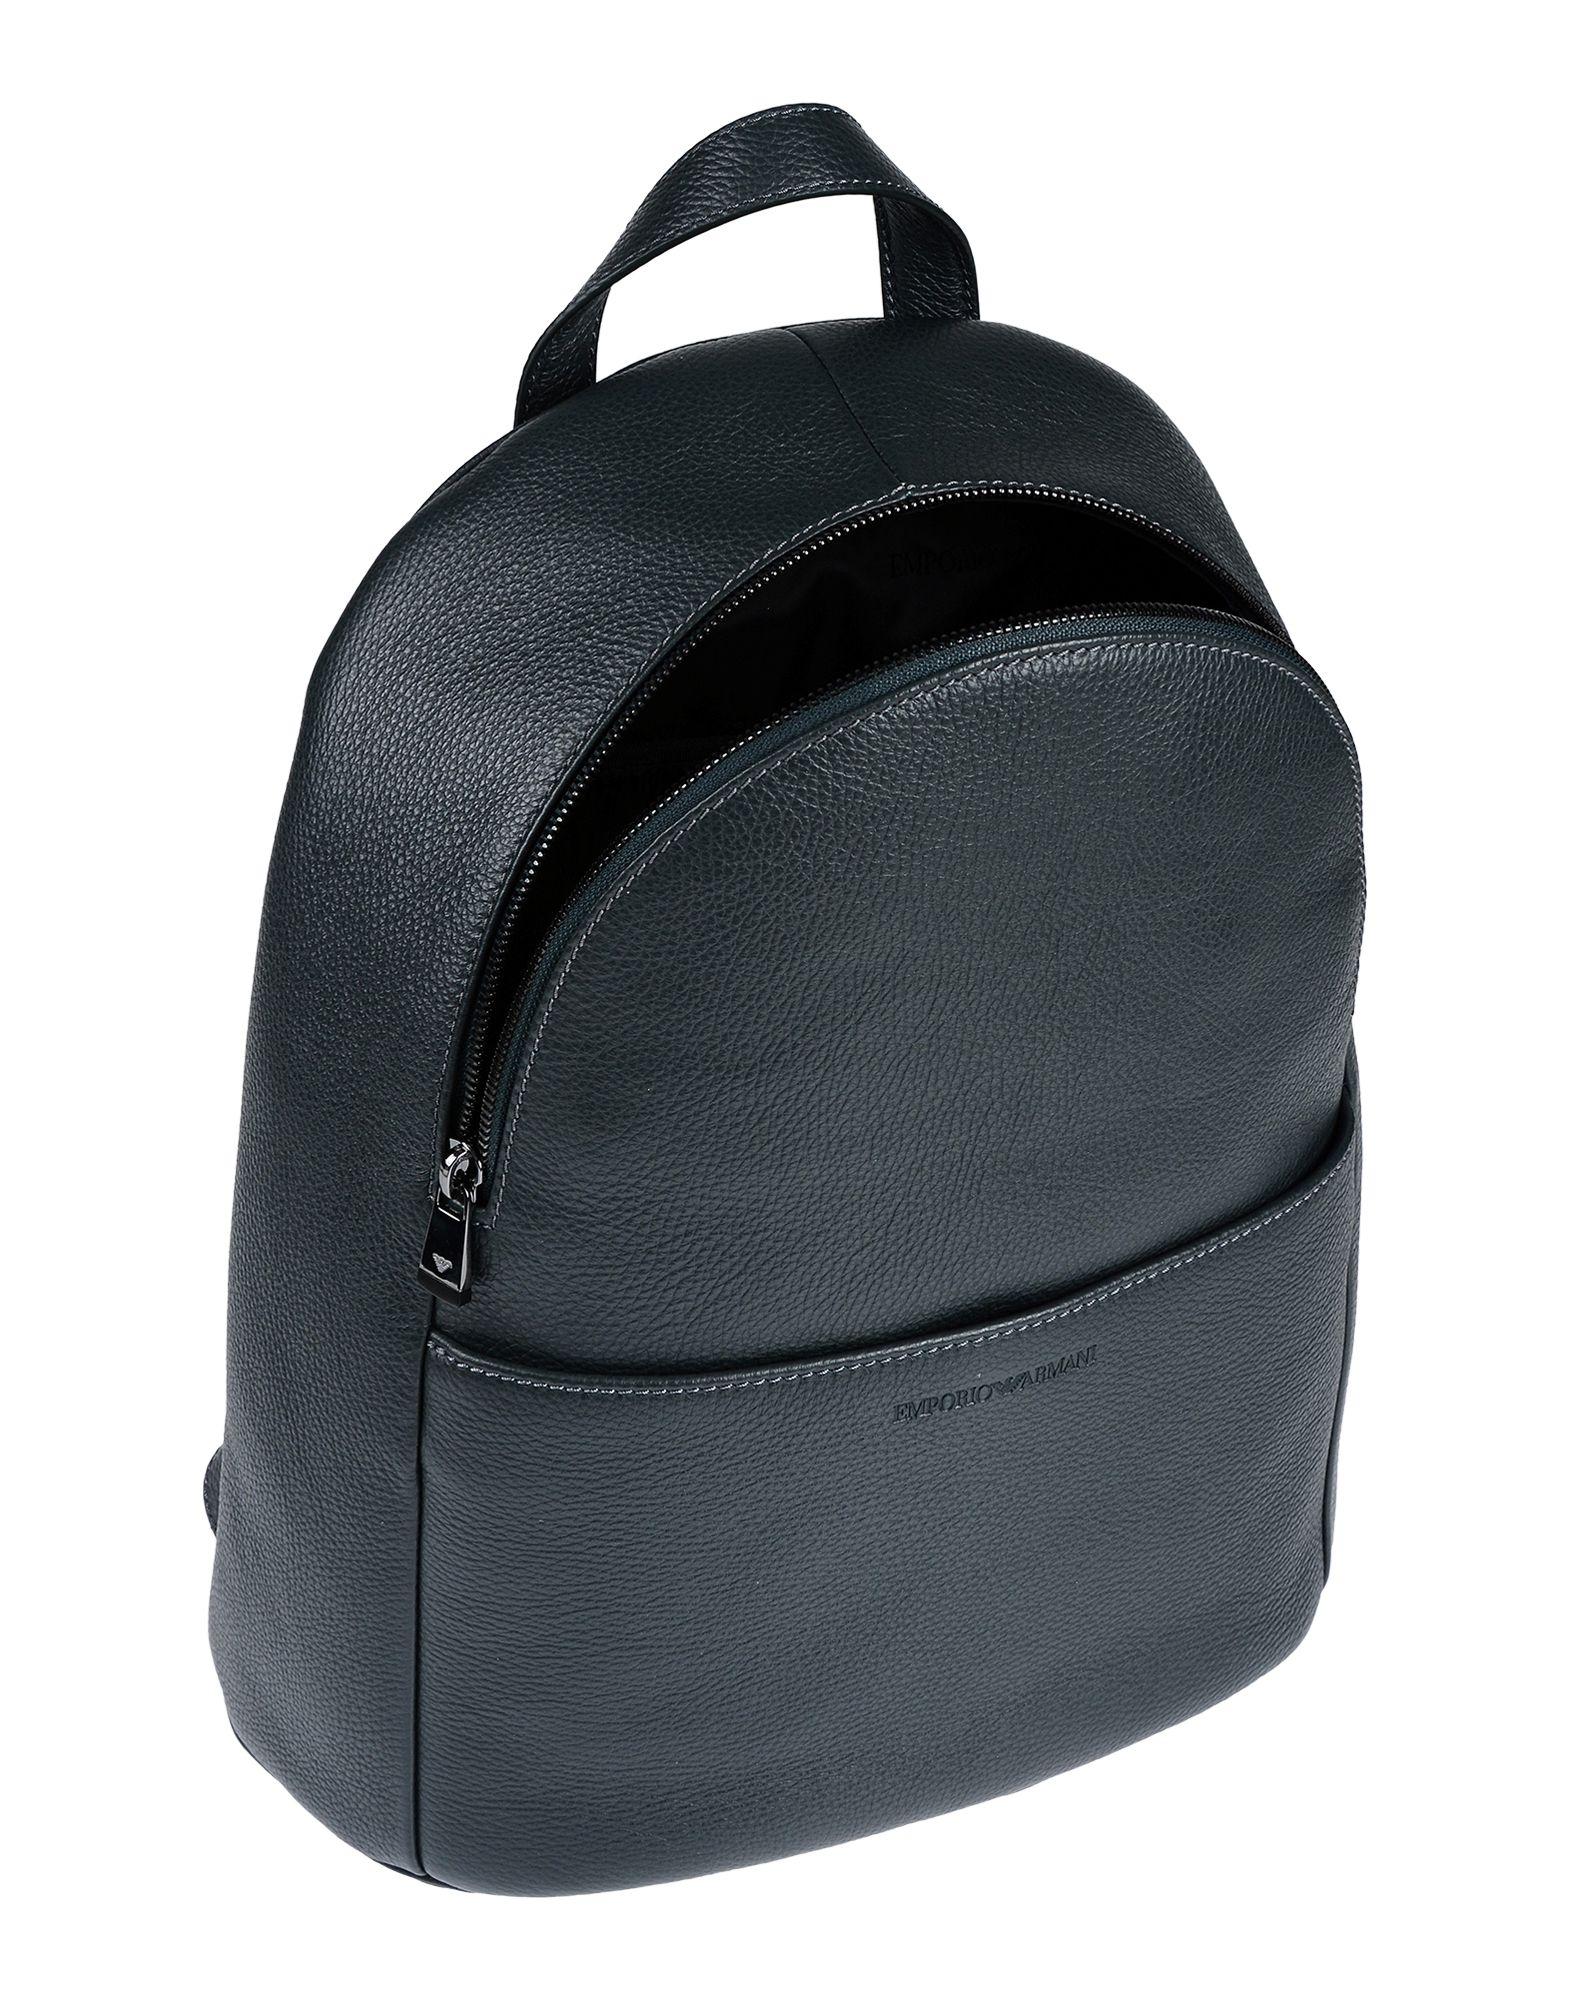 Emporio Armani Leather Backpacks & Fanny Packs for Men - Lyst